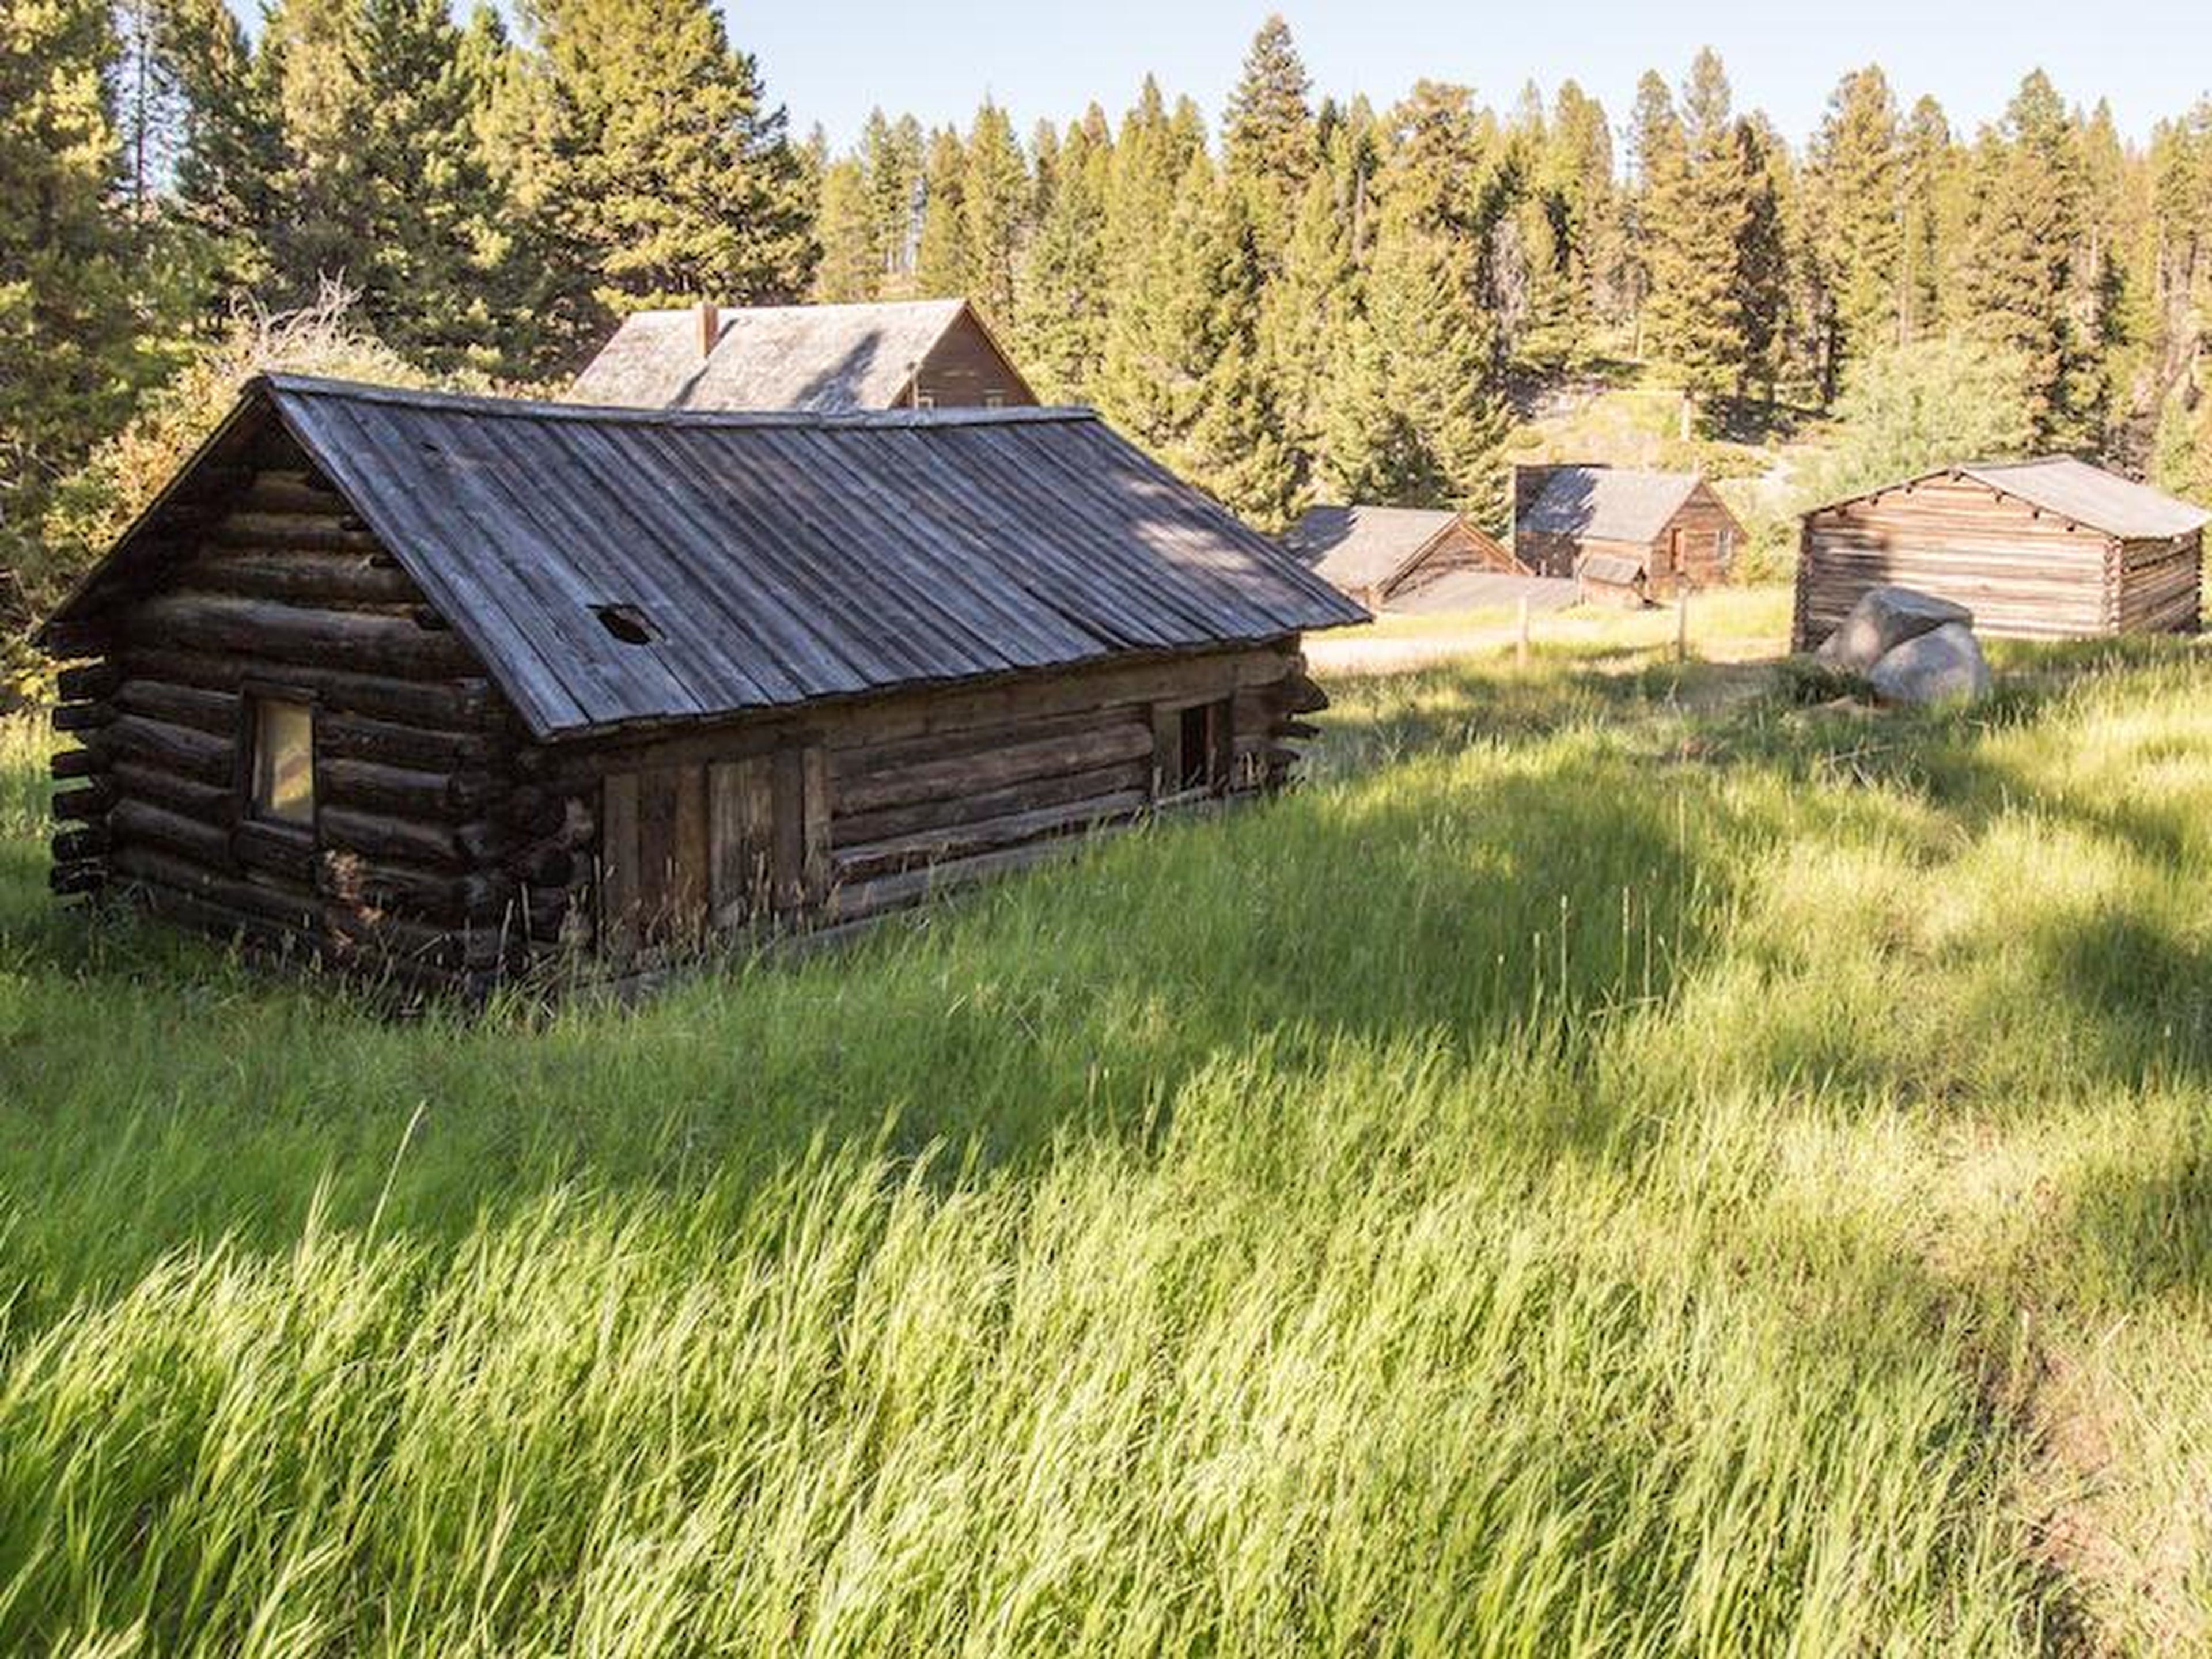 These log cabins in Montana have stood the test of time.